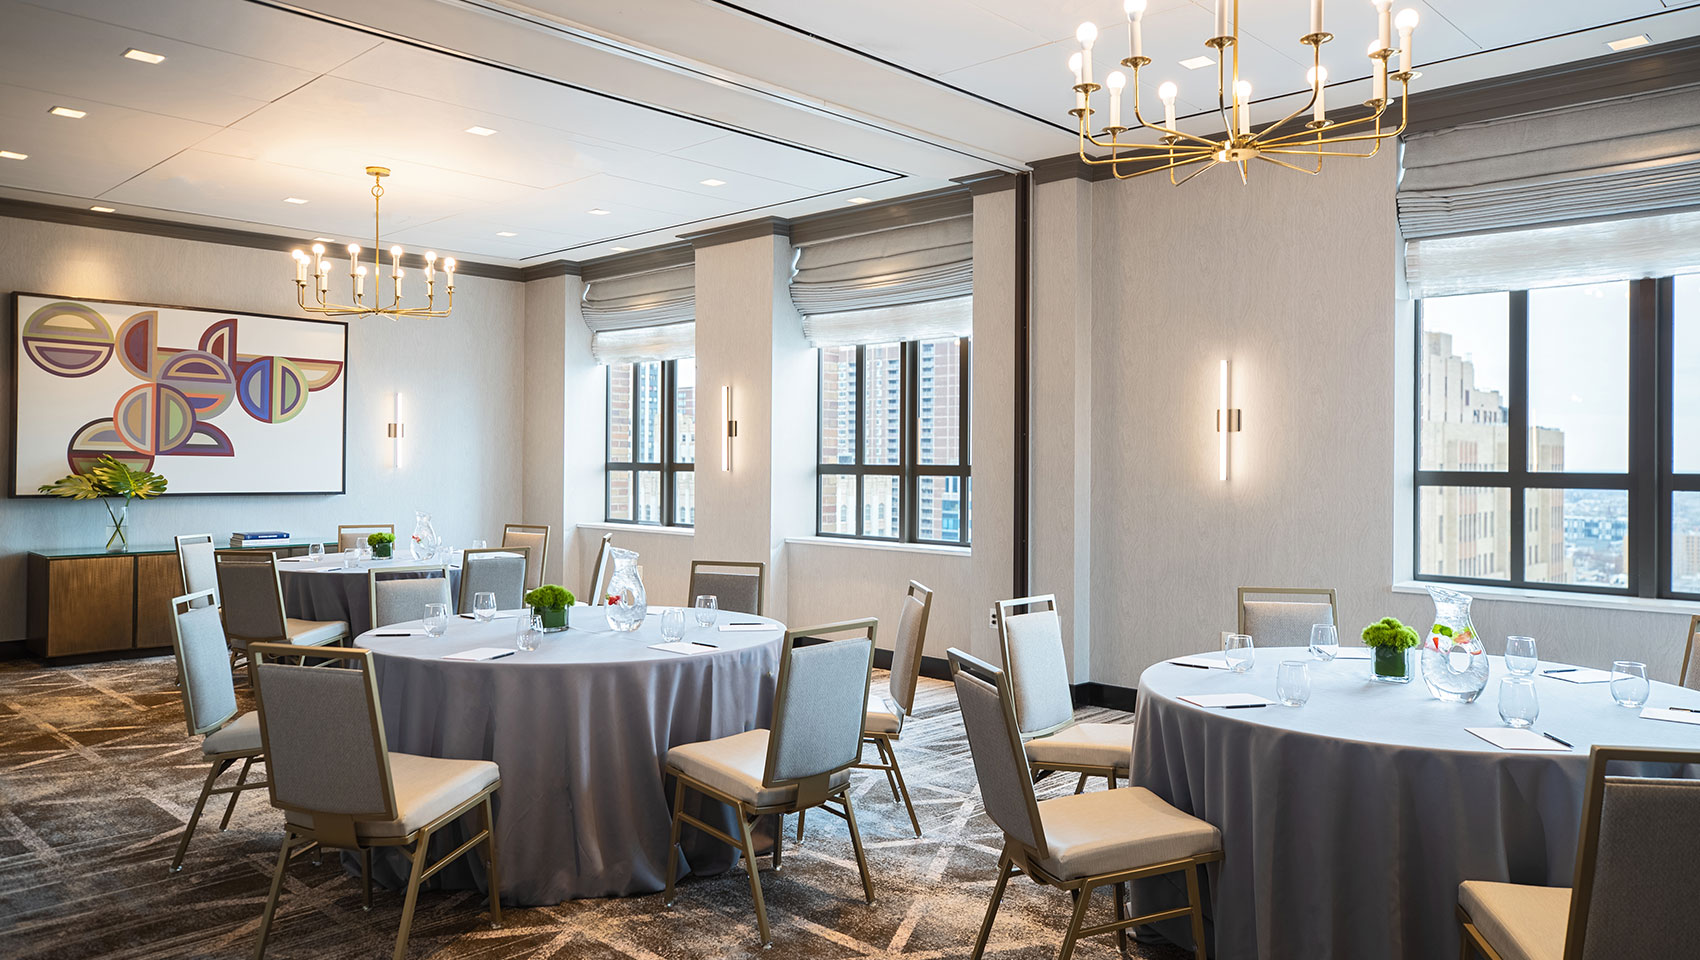 Cret room at Kimpton Hotel Palomar Philadelphia in a rounds meeting set up with multiple round tables that have notepads on top near large sunlit windows overlooking city views